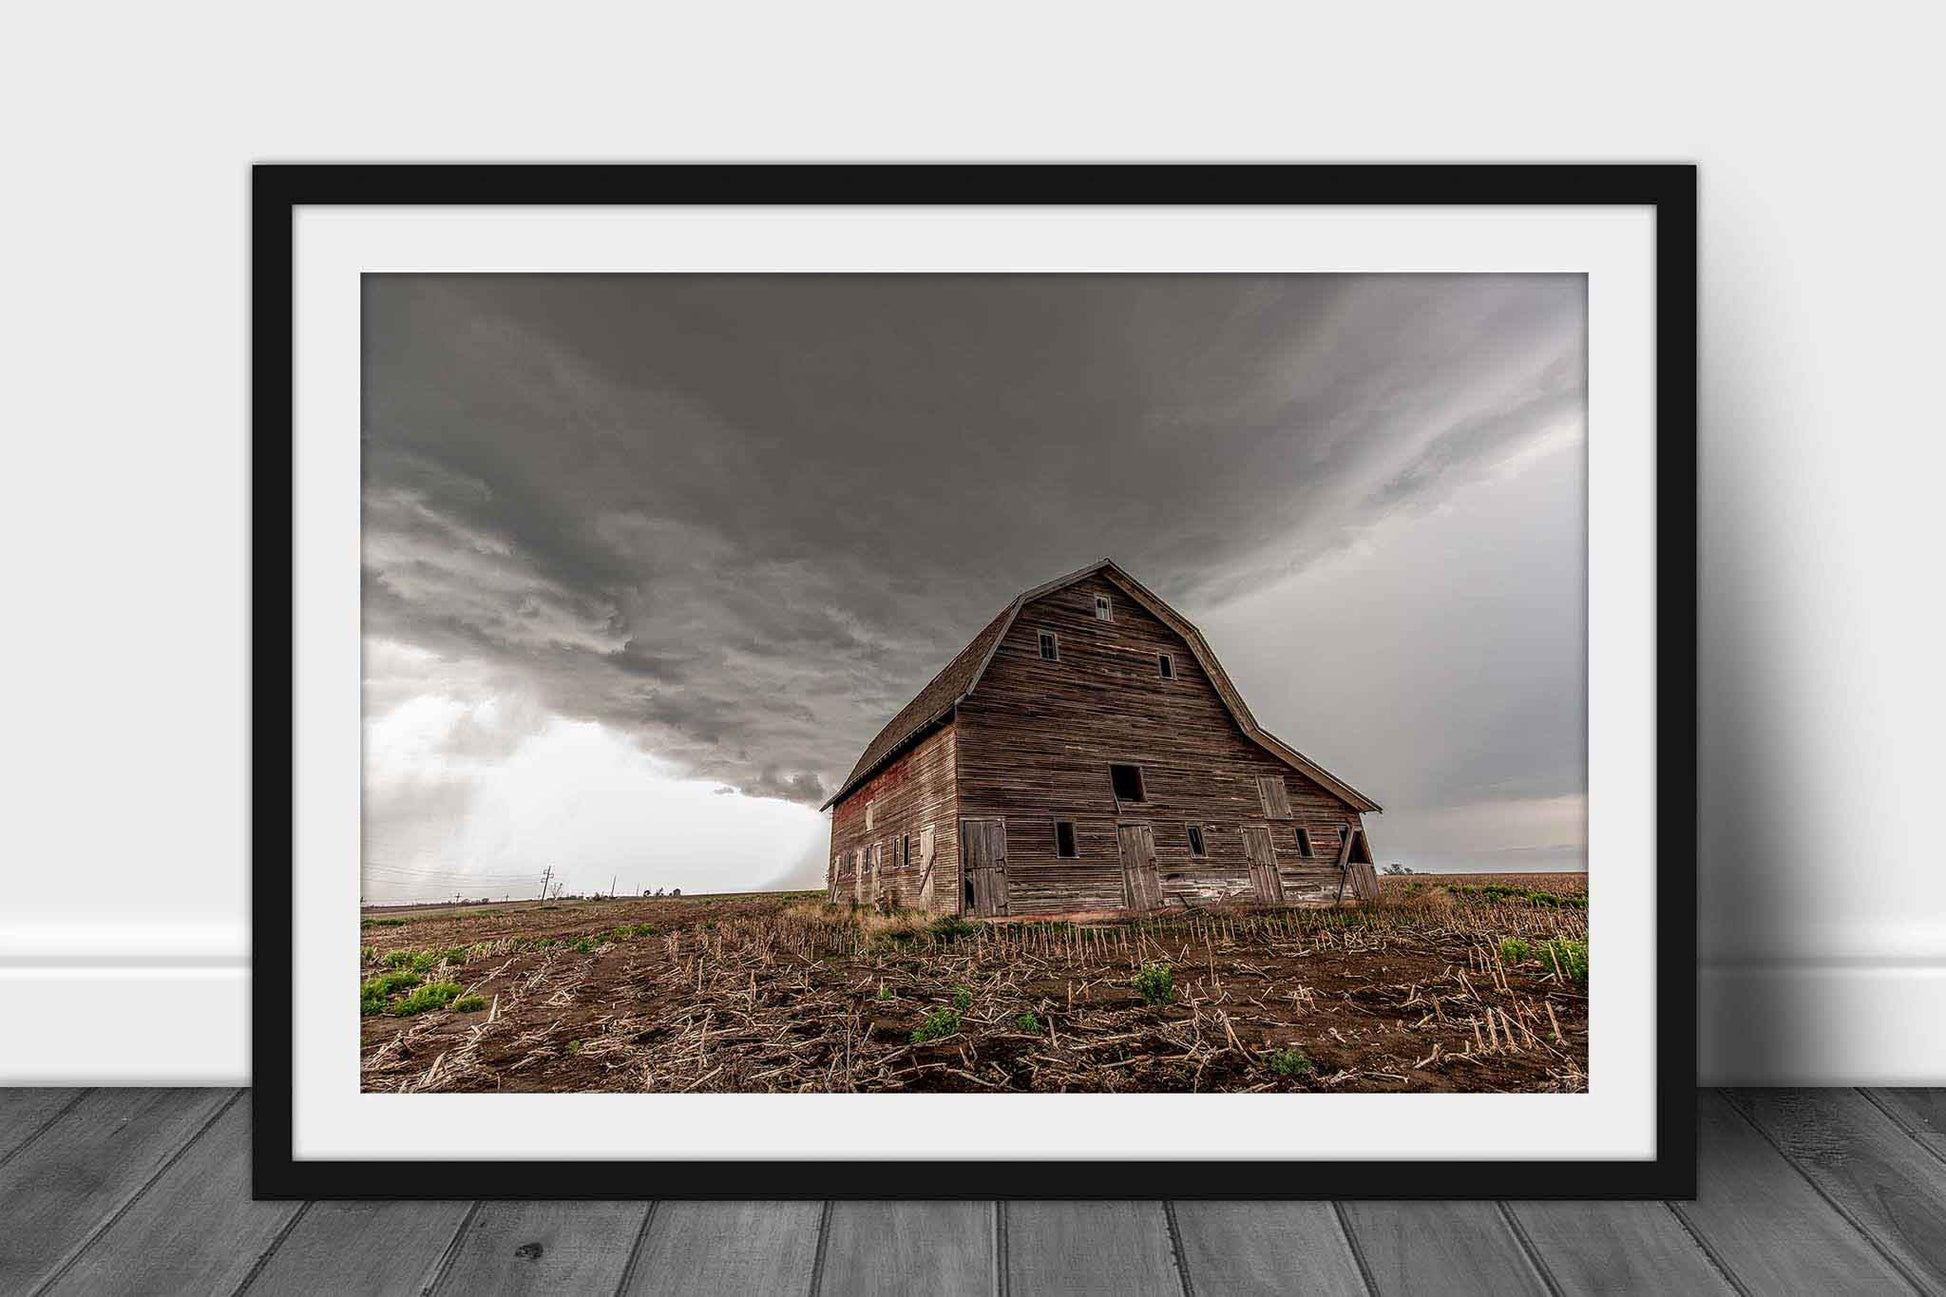 Framed country print of a large red barn under an advancing thunderstorm on a stormy day in Nebraska by Sean Ramsey of Southern Plains Photography.